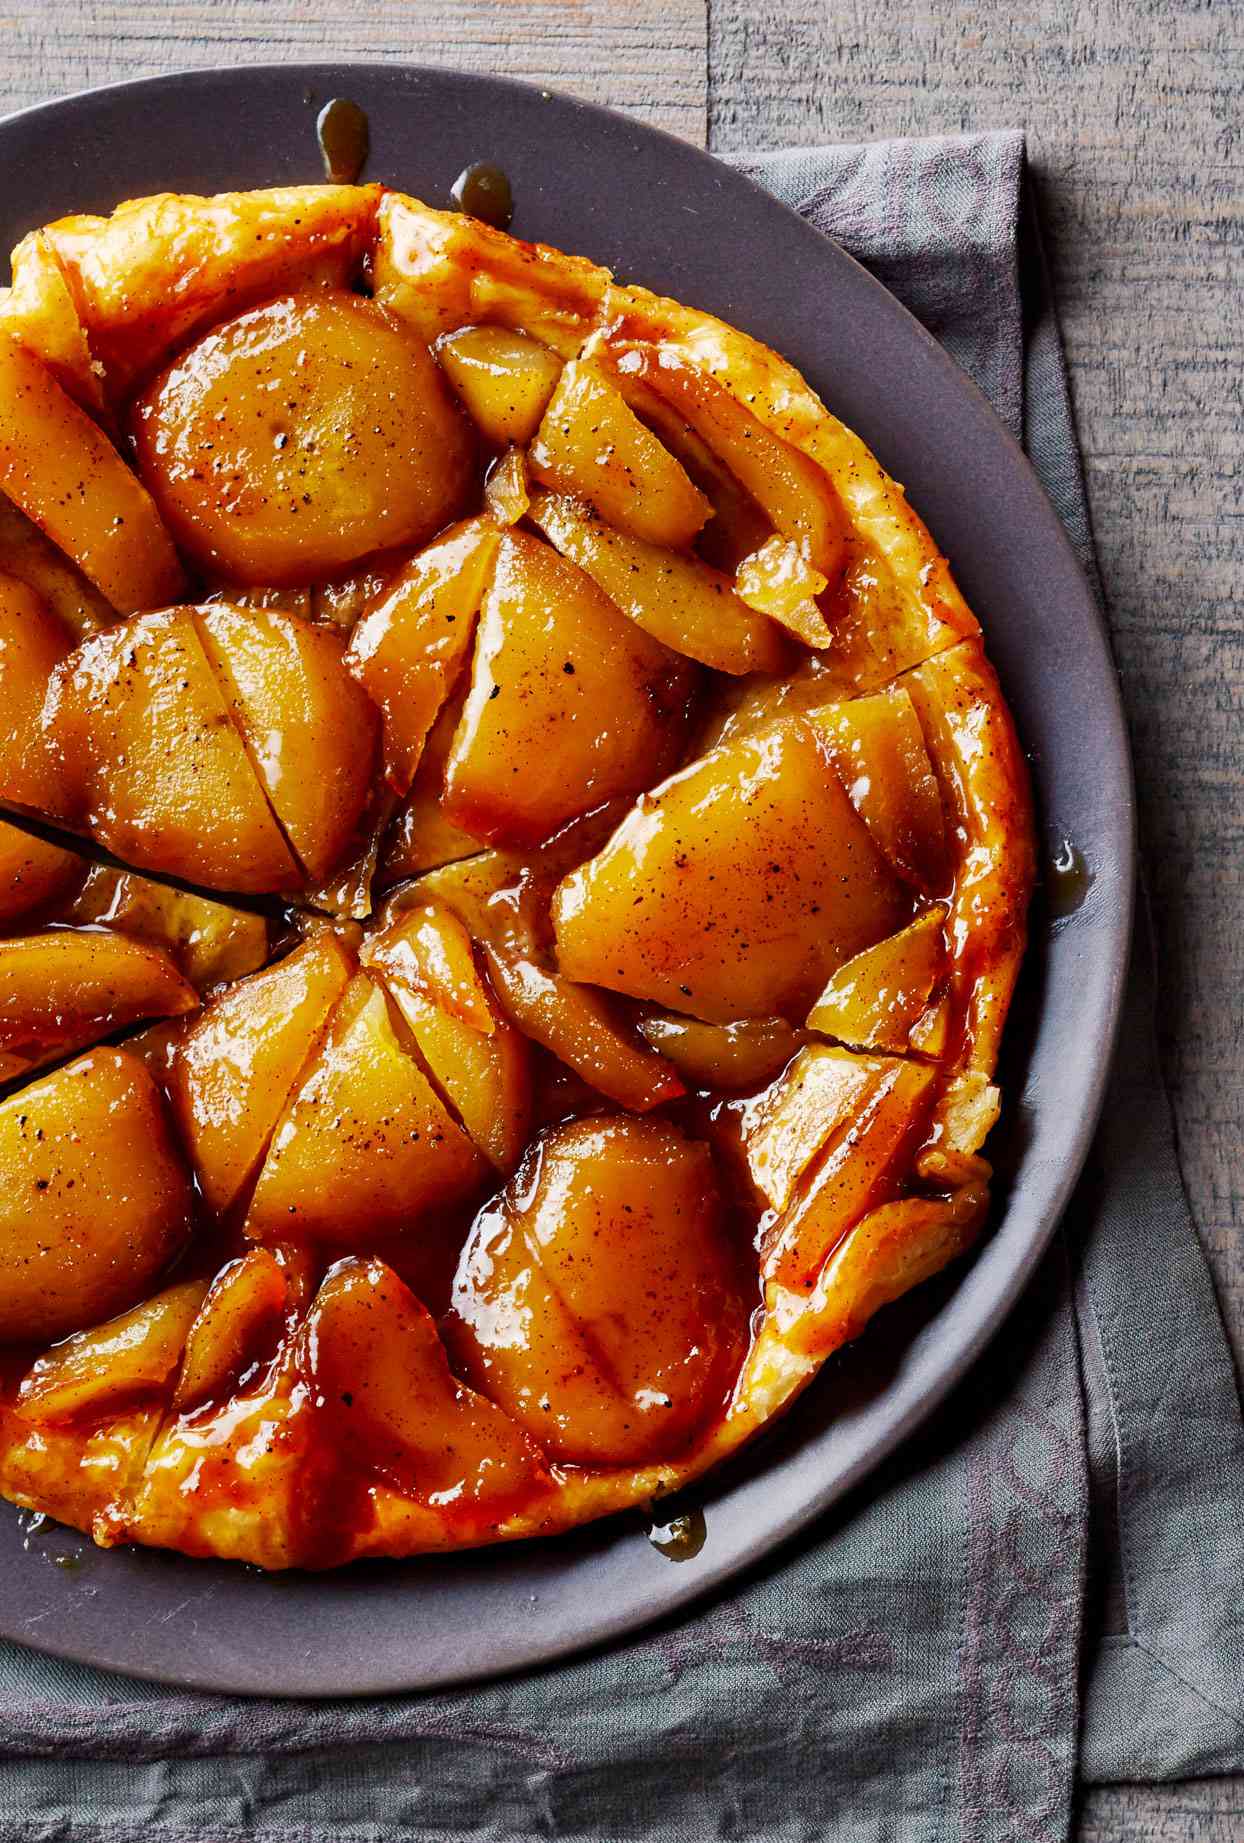 Tart with large pieces of baked apples on black plate